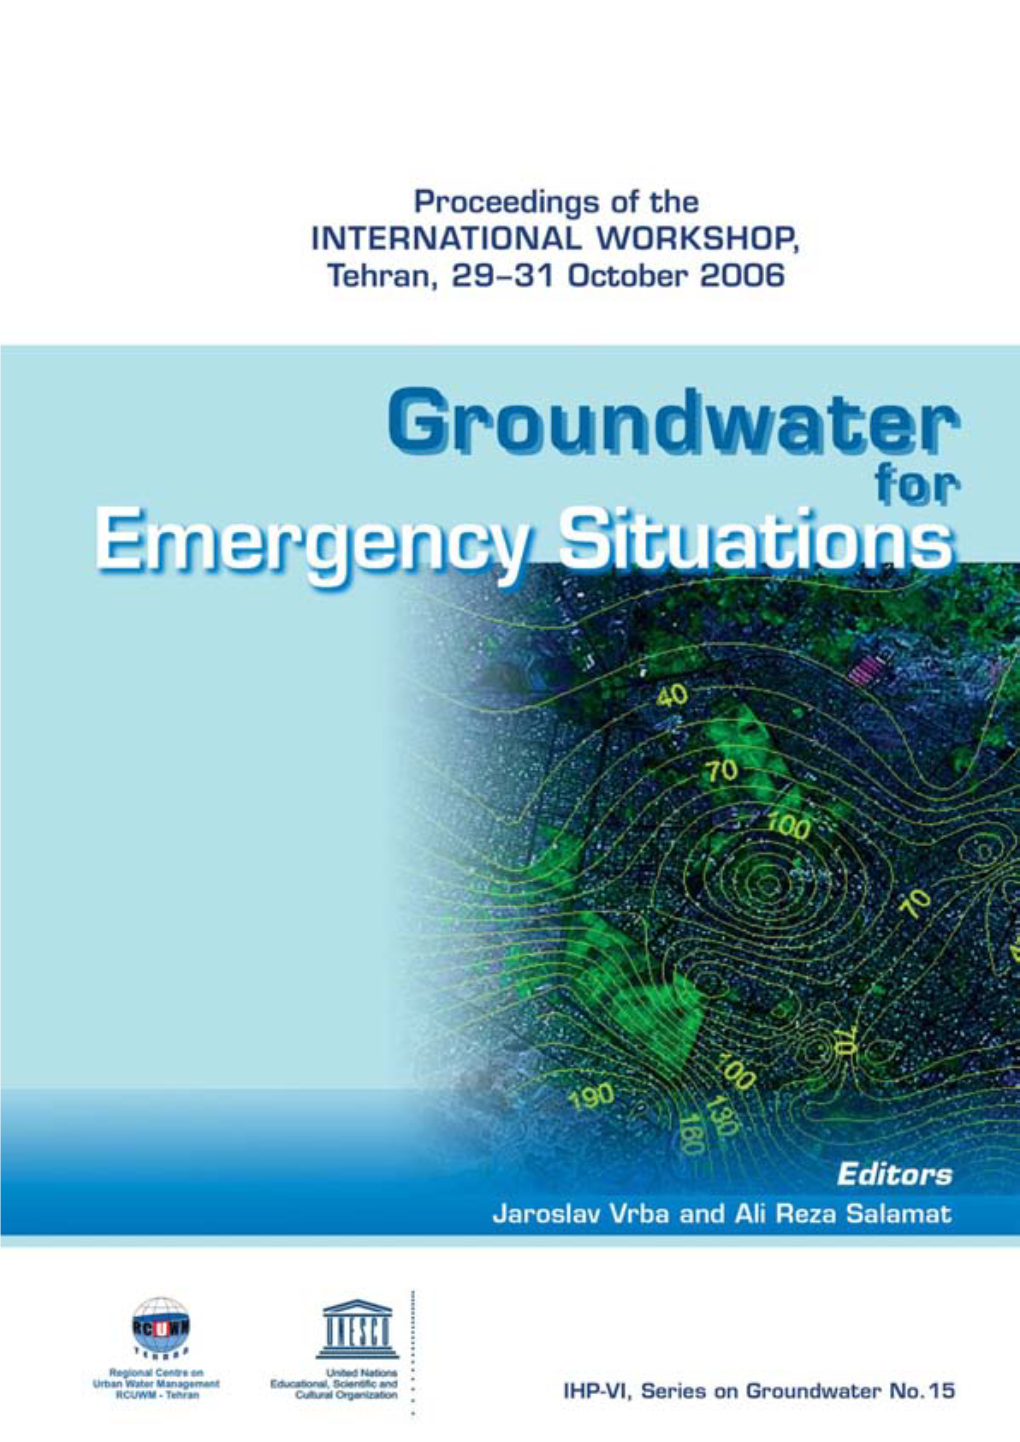 Groundwater for Emergency Situations